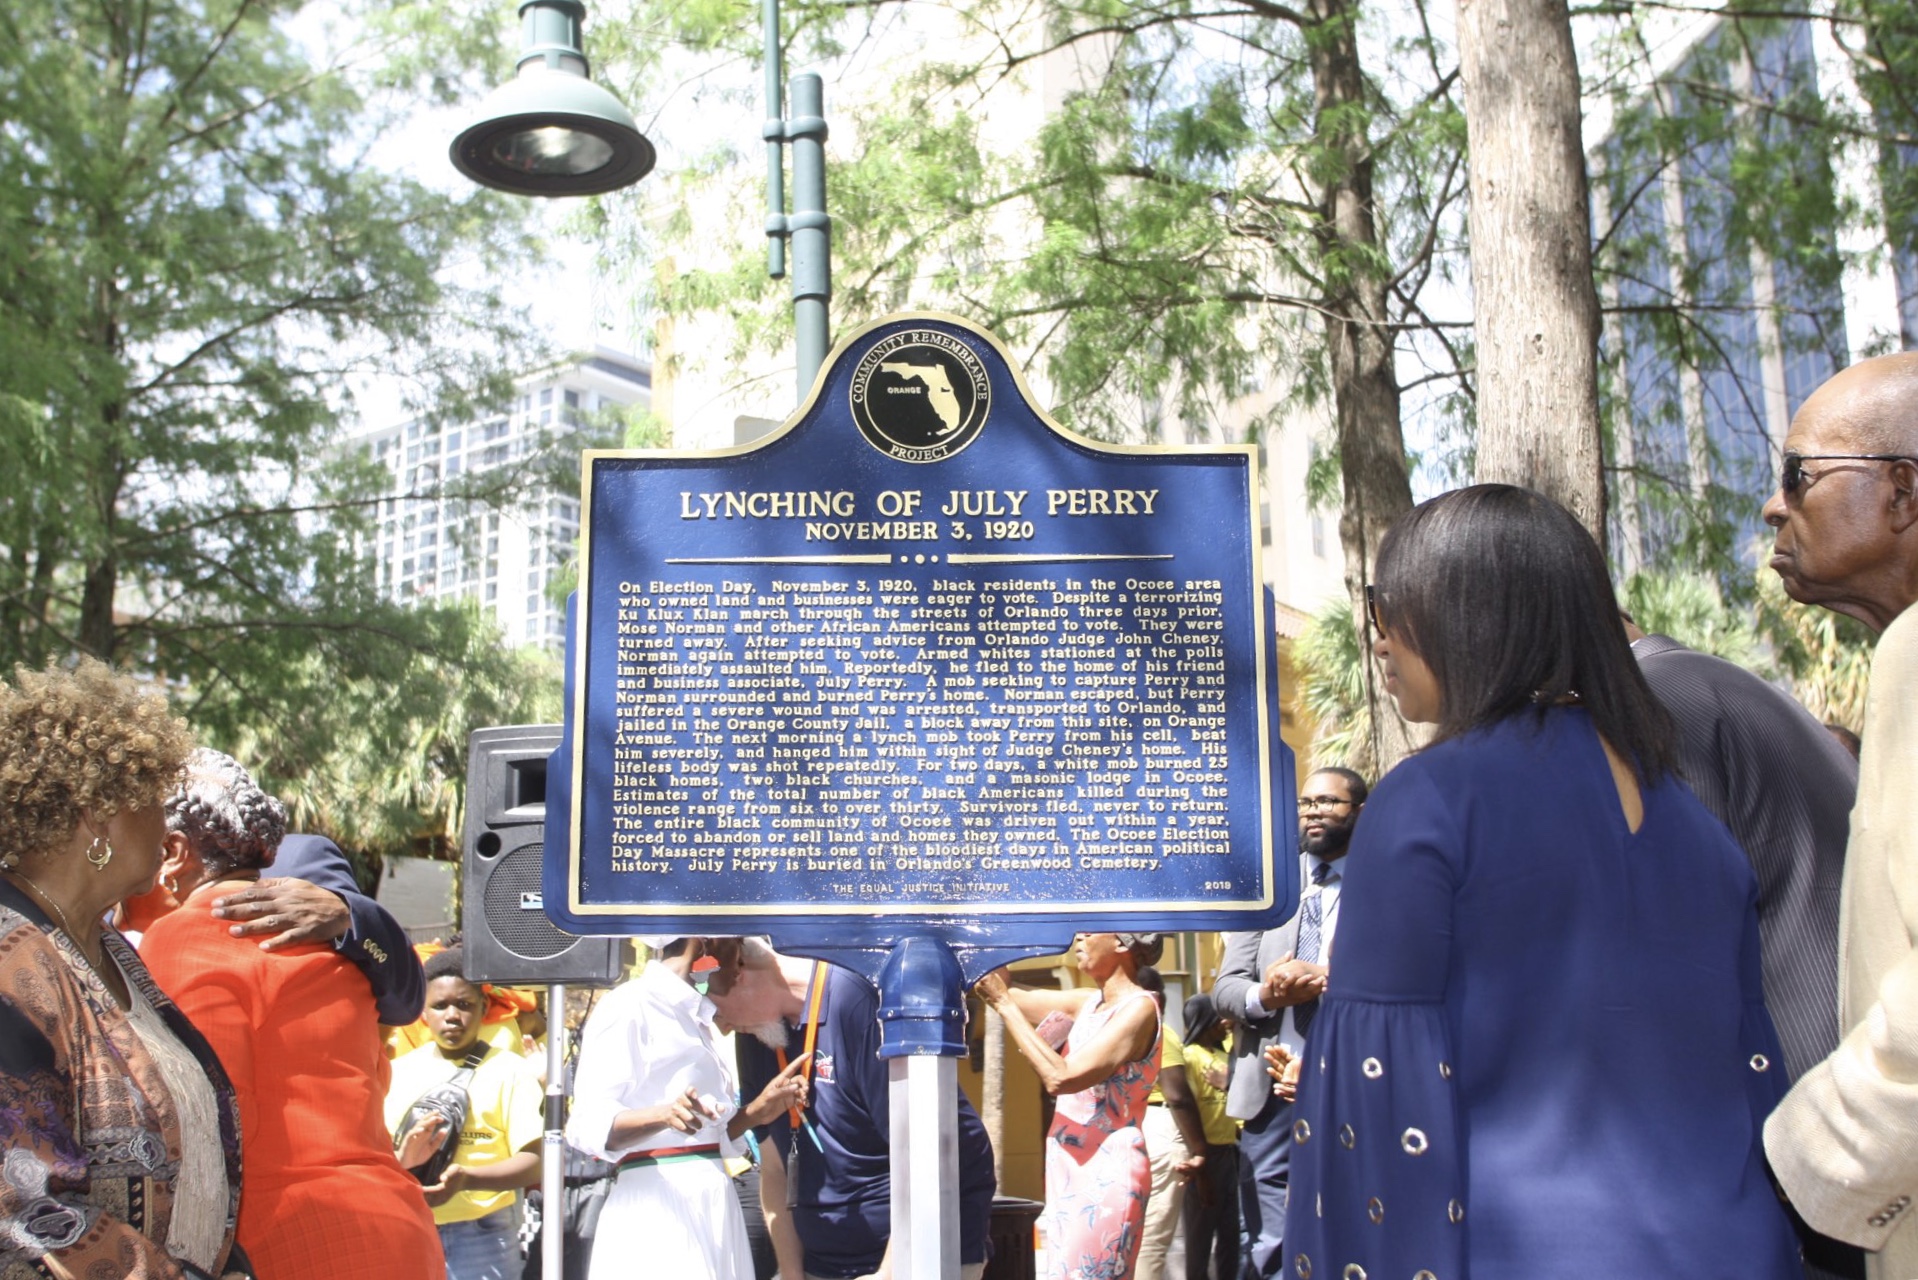 Photo of the July Perry marker that reads "Lynching of July Perry, November 3, 1920"